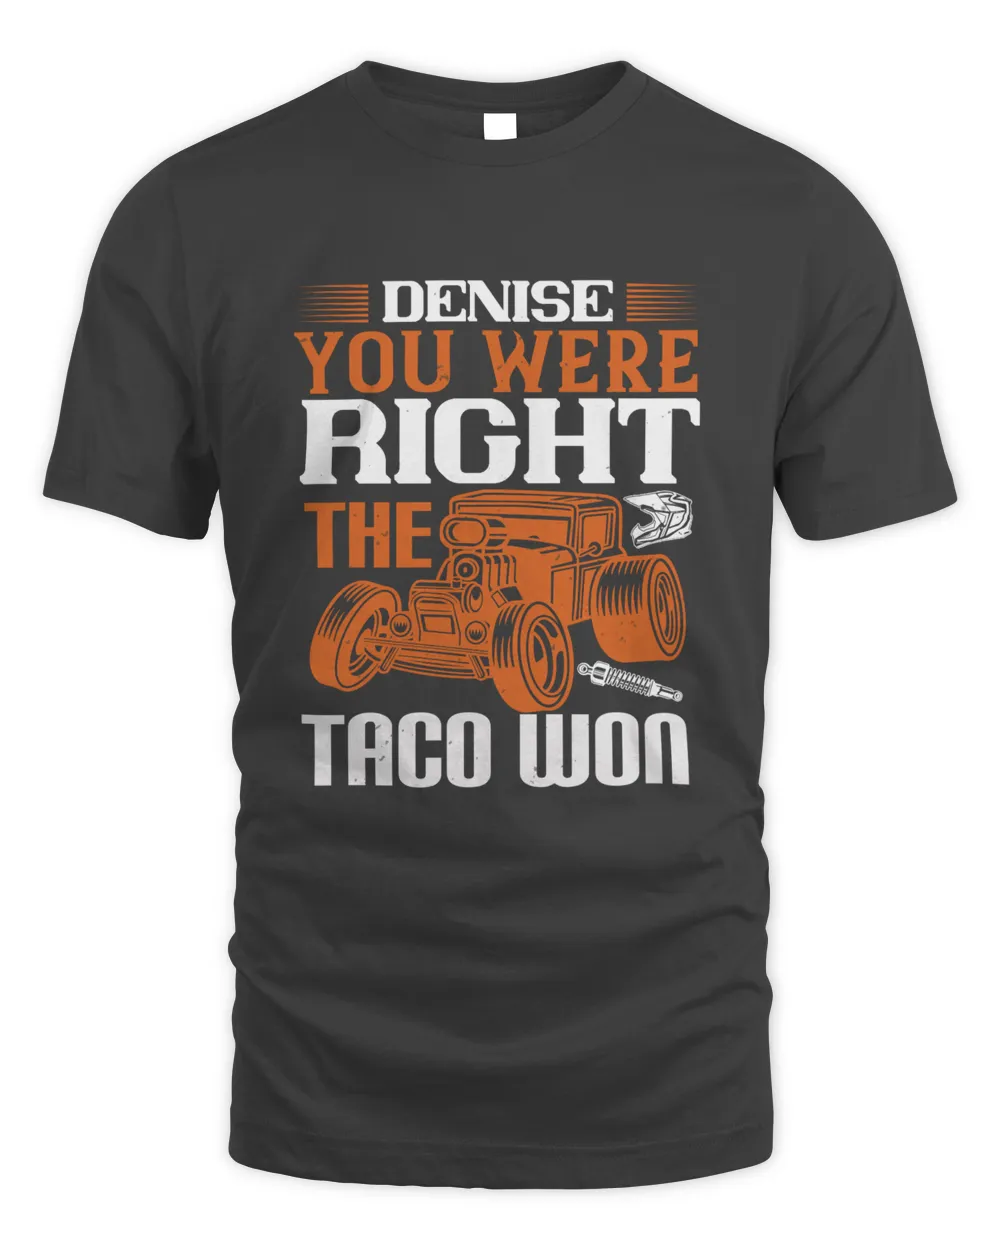 Denise, you were right; the taco won-01